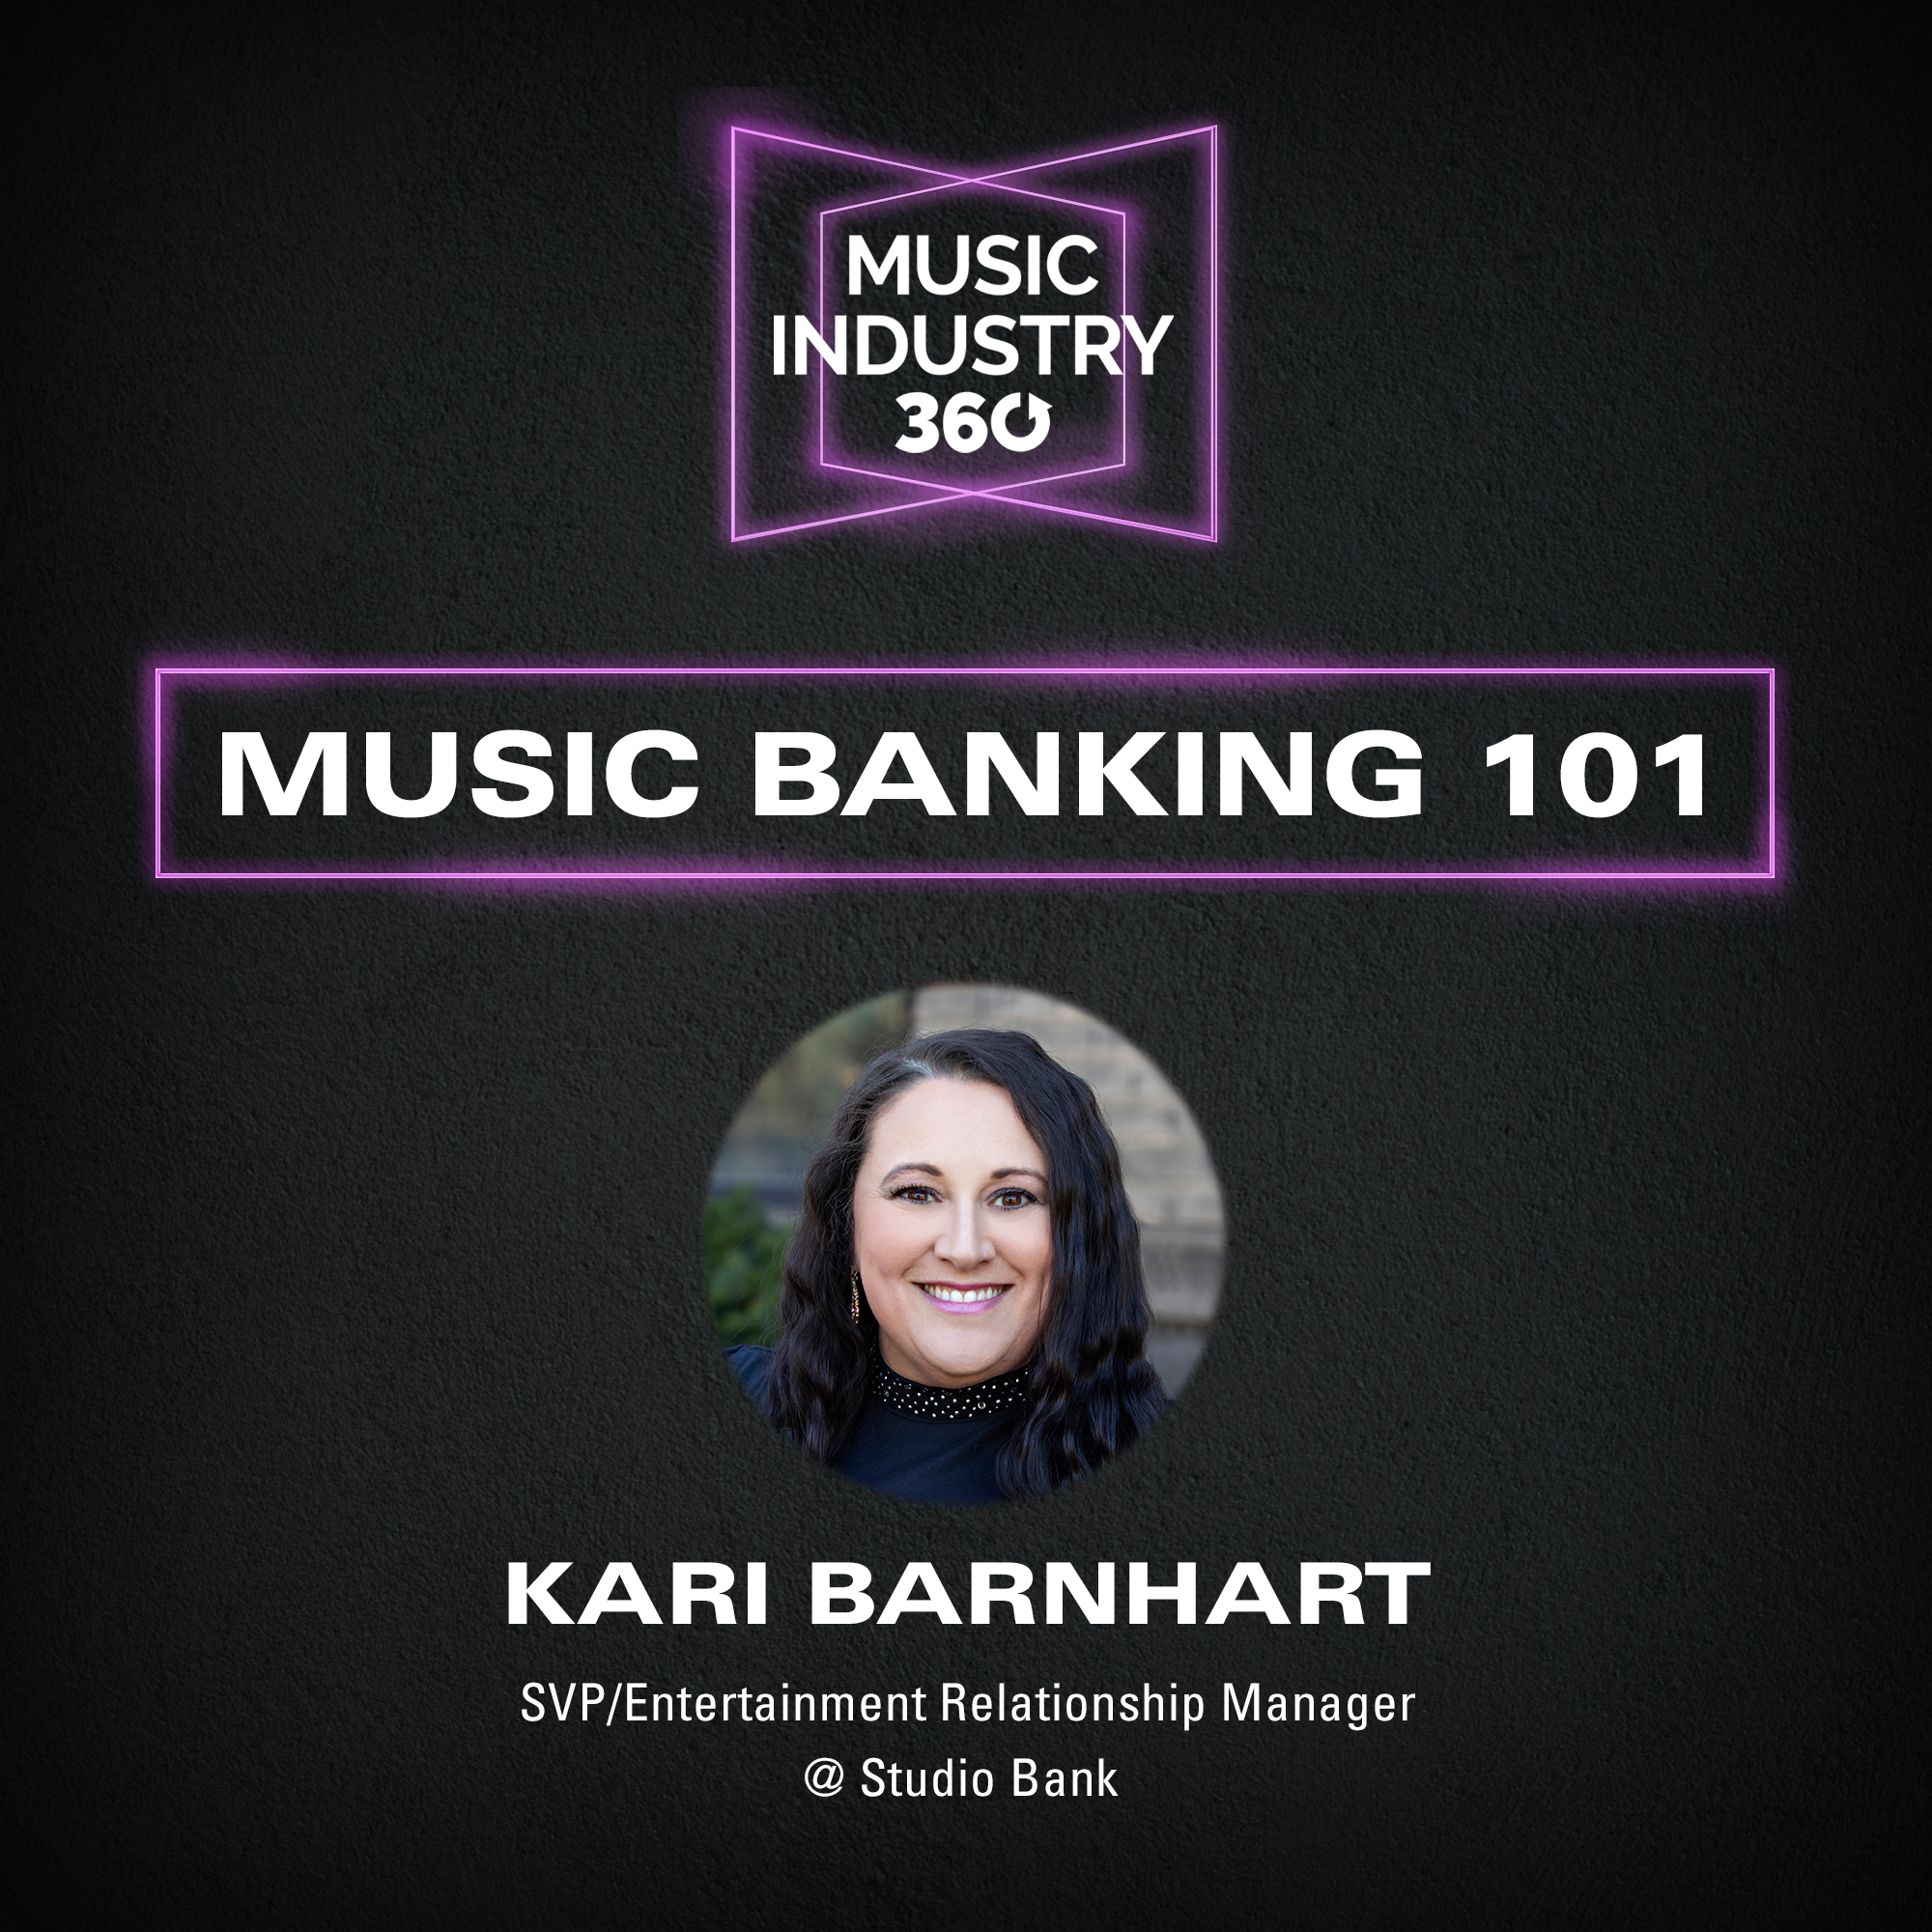 Music Banking 101: Why Music Banking is so Important? | Music Industry 360 Podcast